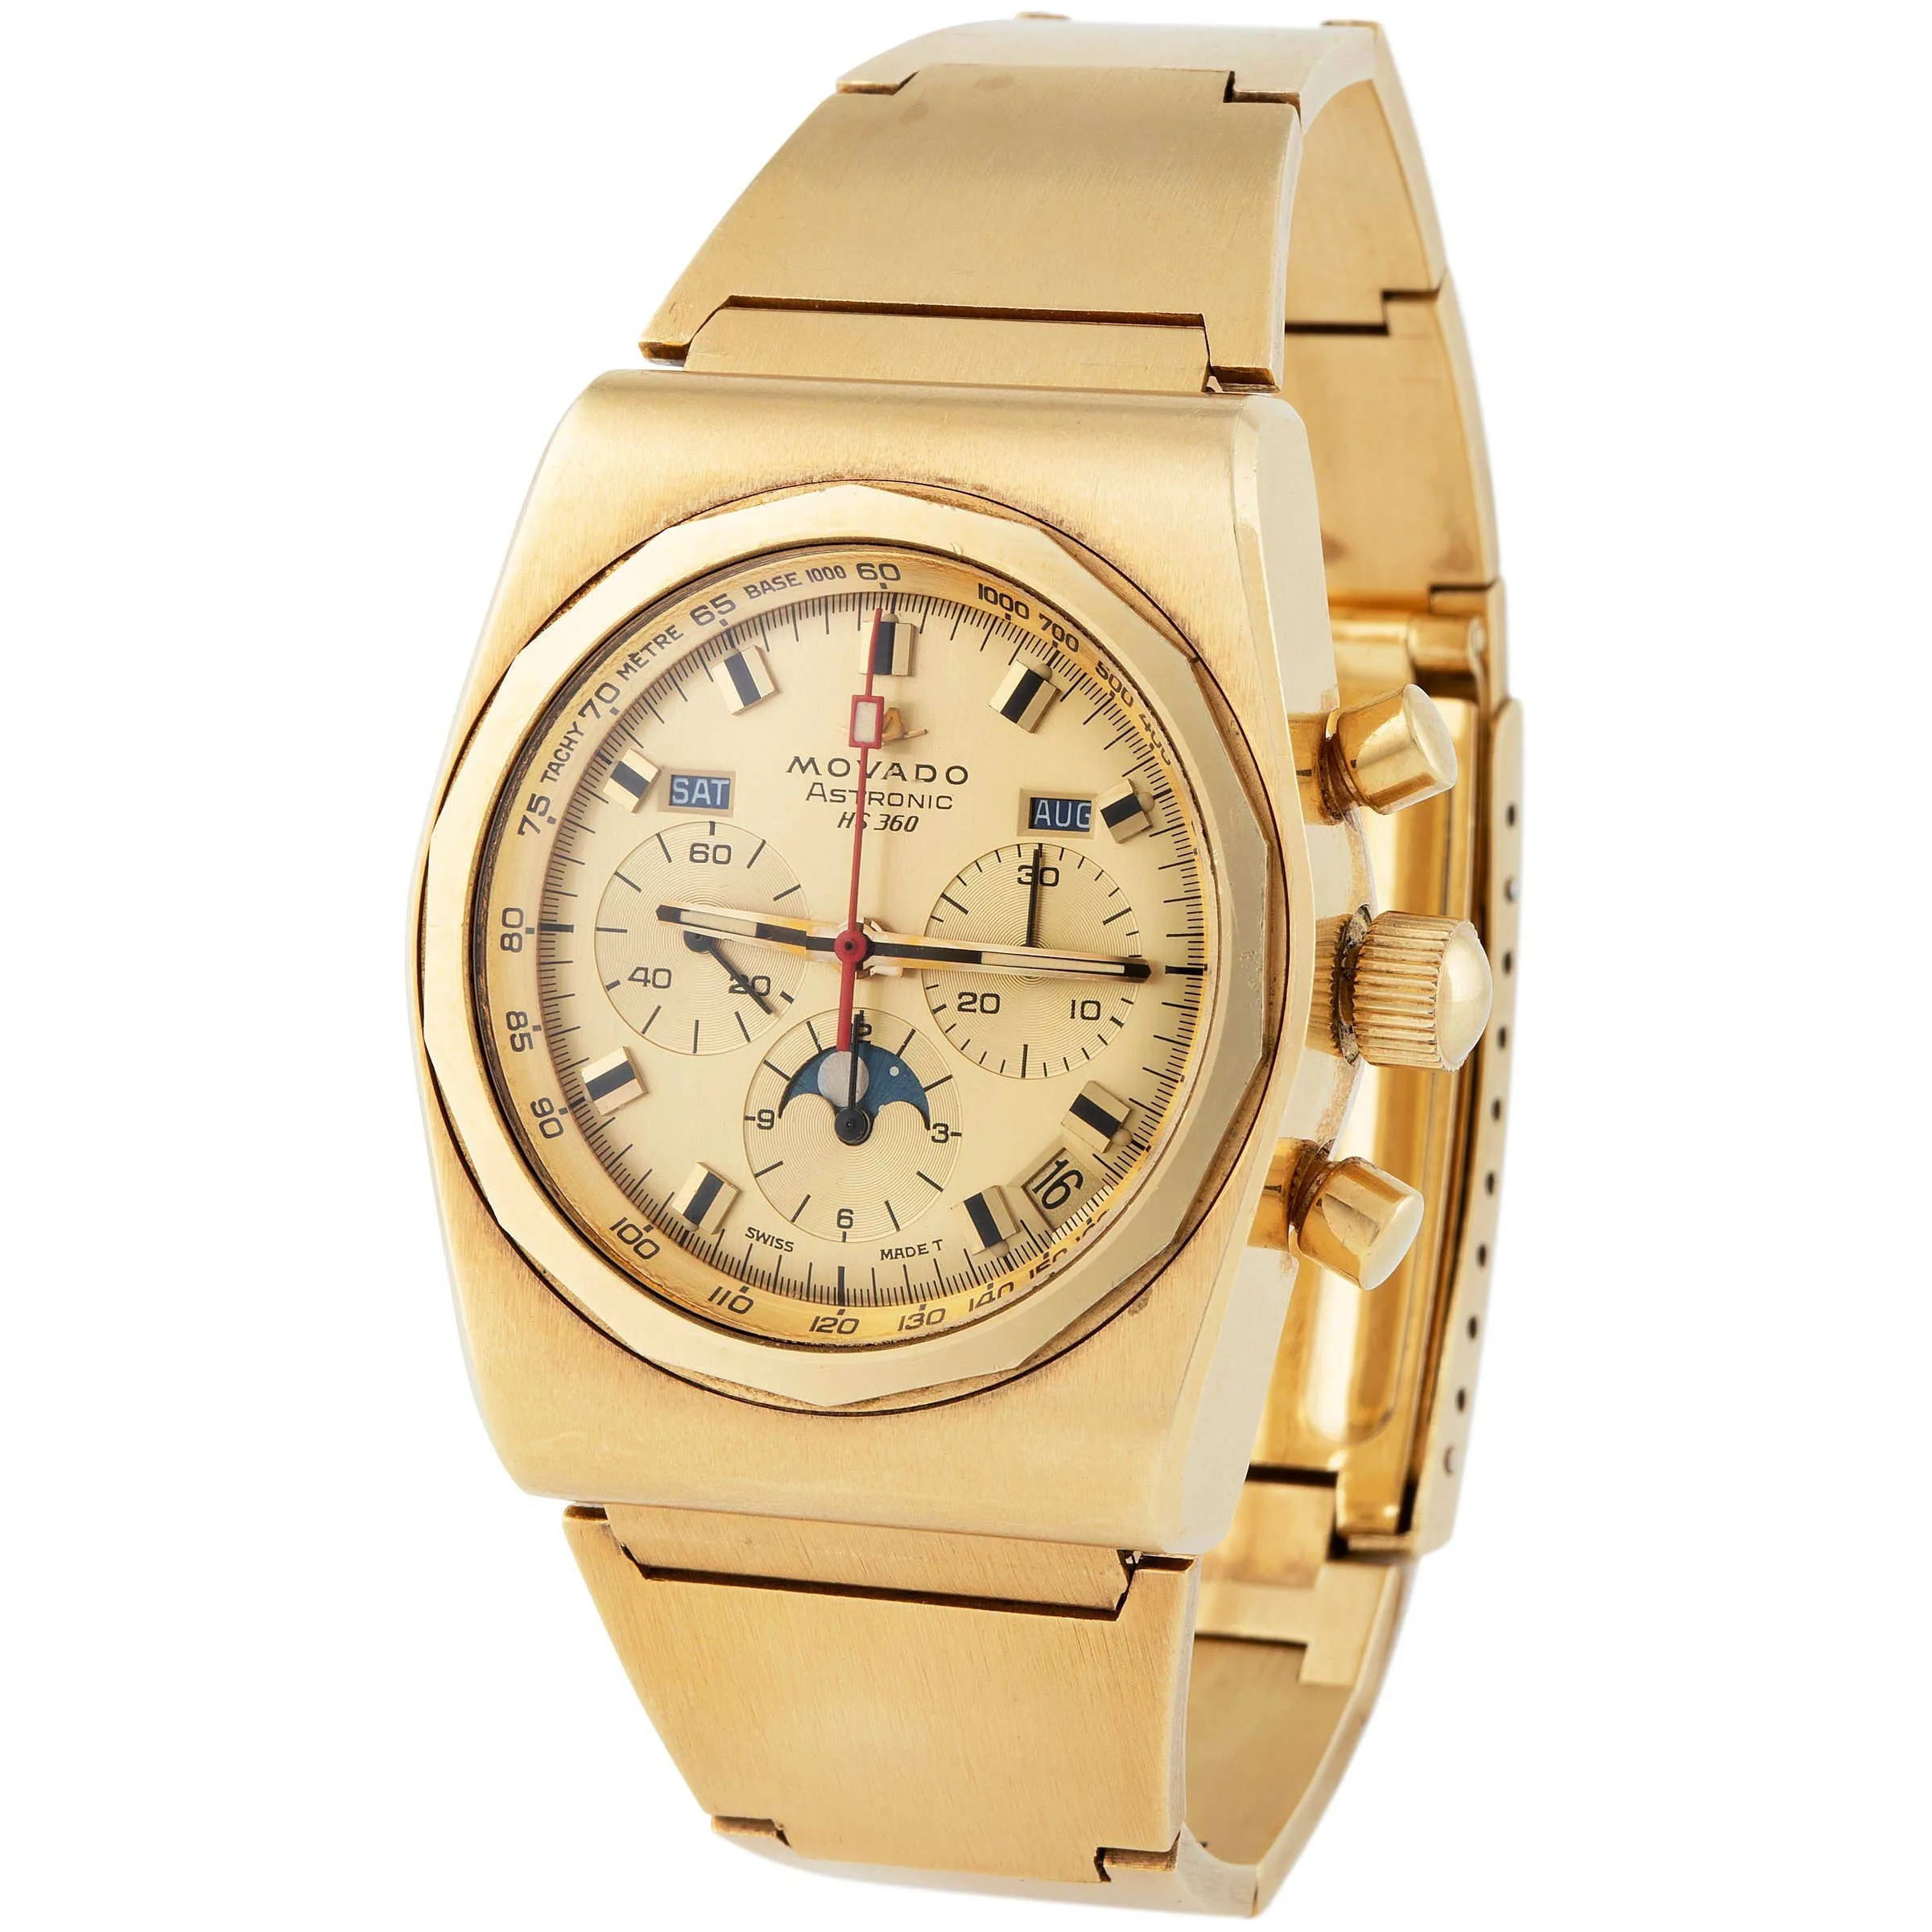 Movado 30.0010.436 45mm Yellow gold Champagne